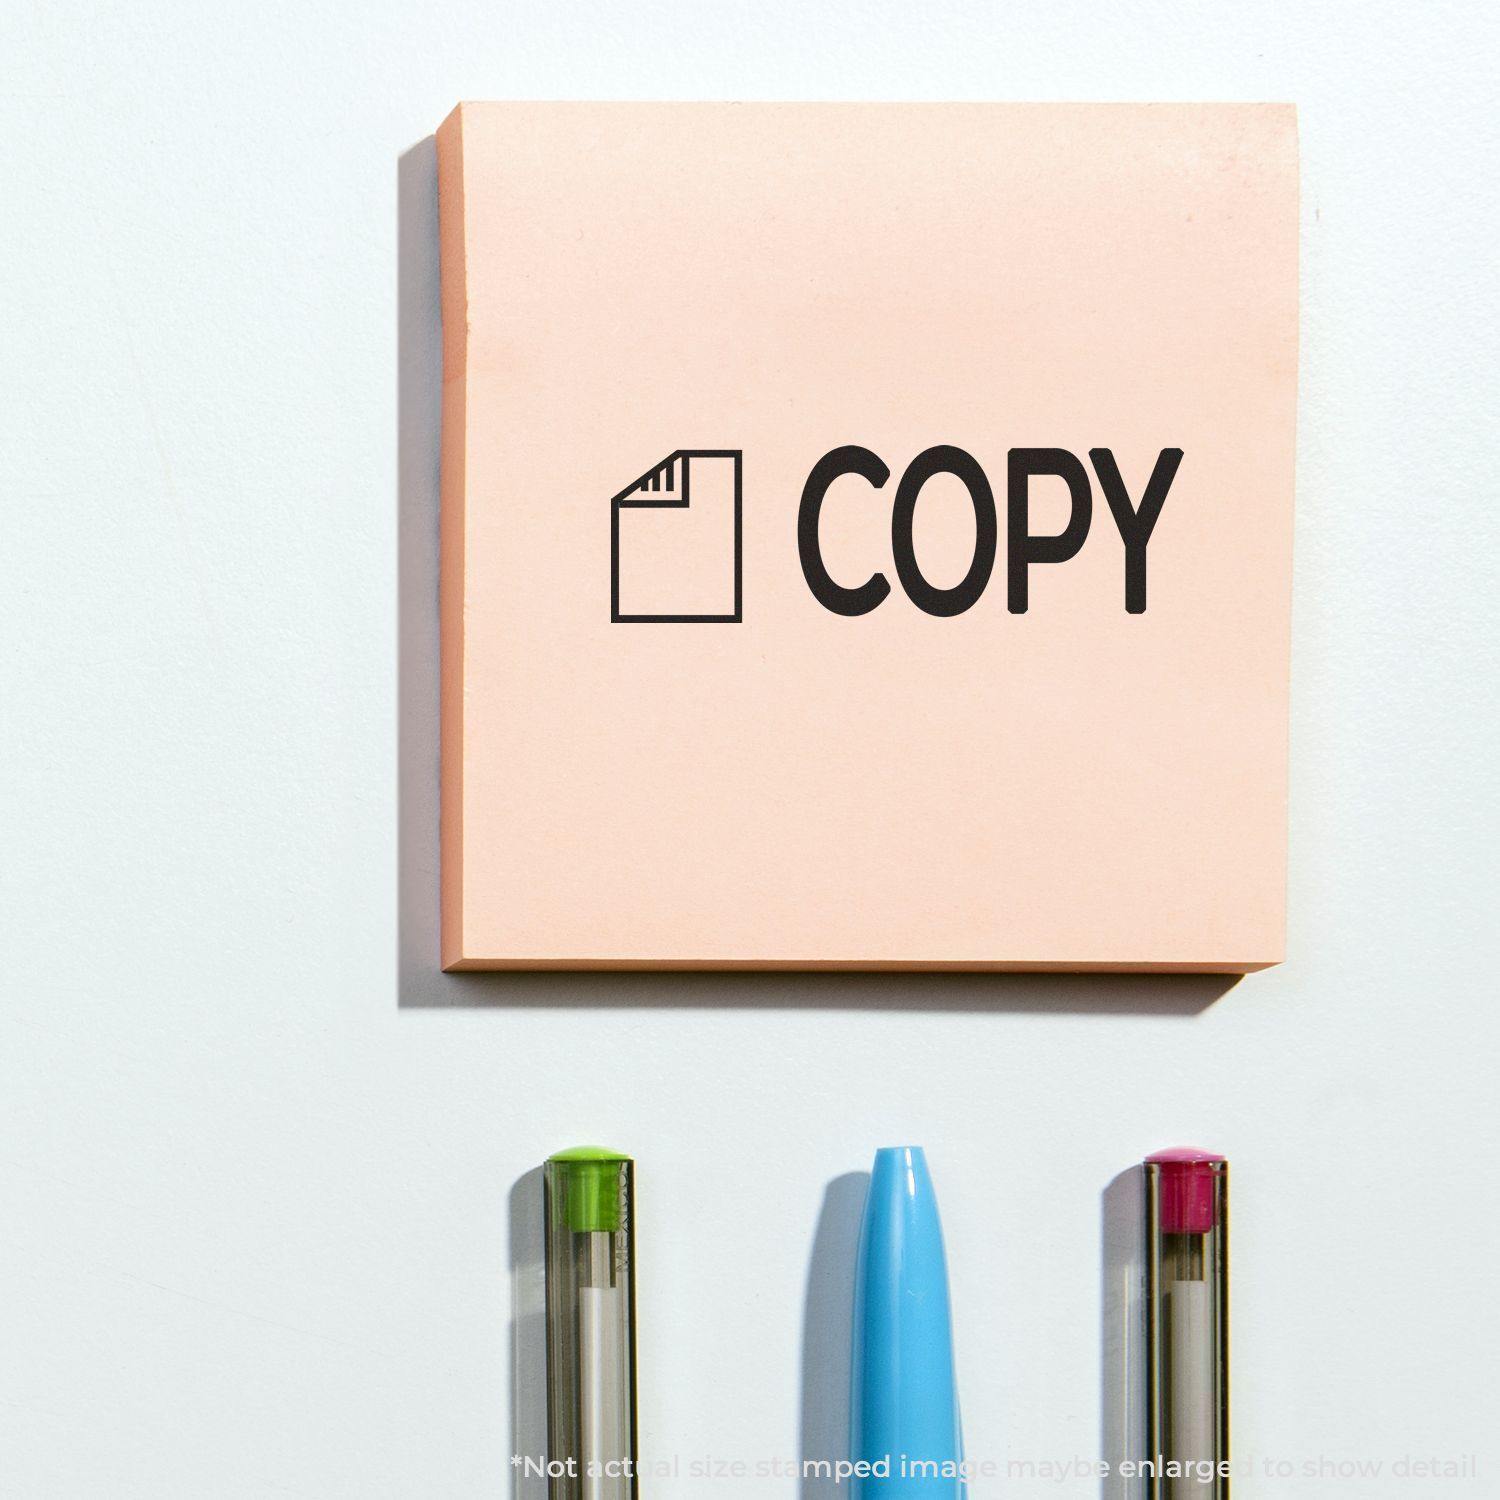 A stock office rubber stamp with a stamped image showing how the text "COPY" in bold font with a small image of a letter on the left side is displayed after stamping.